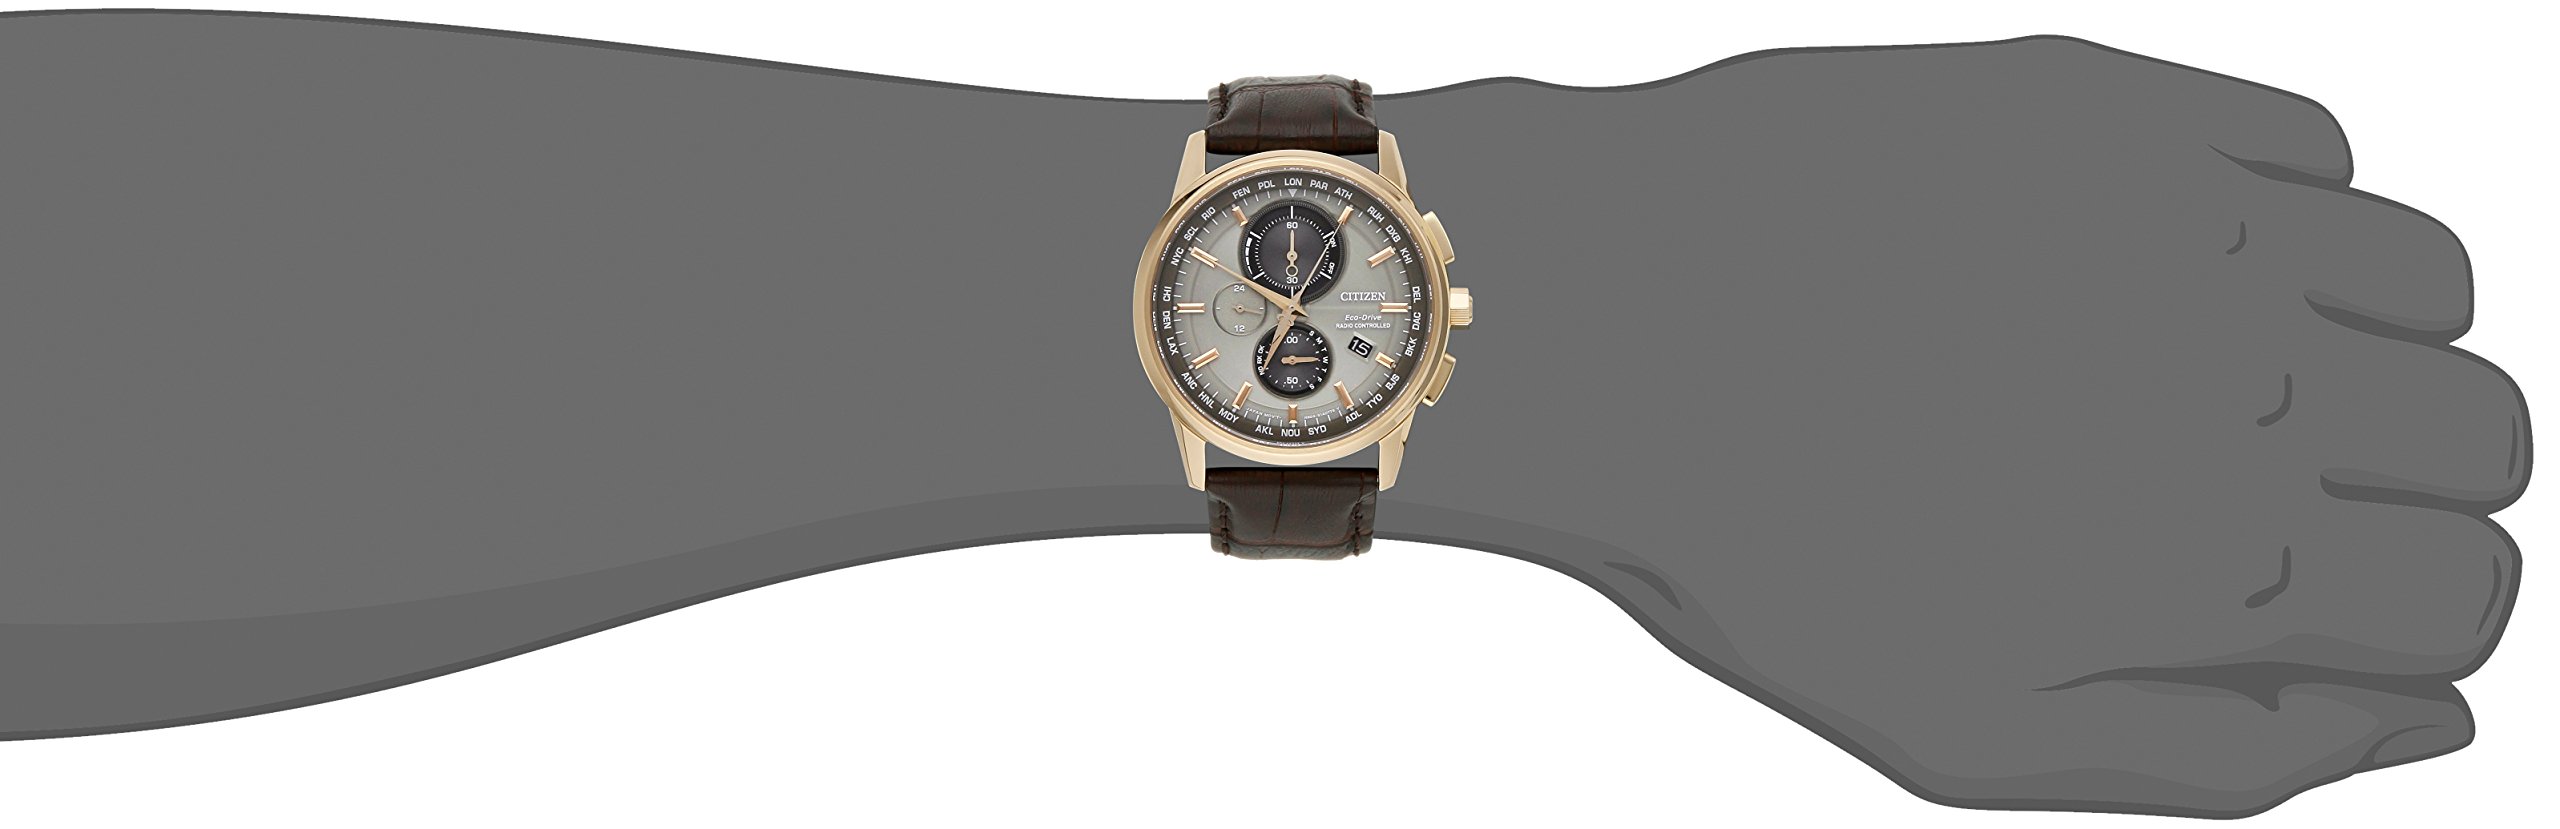 Citizen Eco-Drive World Chronograph A-T Mens Watch, Stainless Steel with Leather strap, Technology, Brown (Model: AT8113-04H)